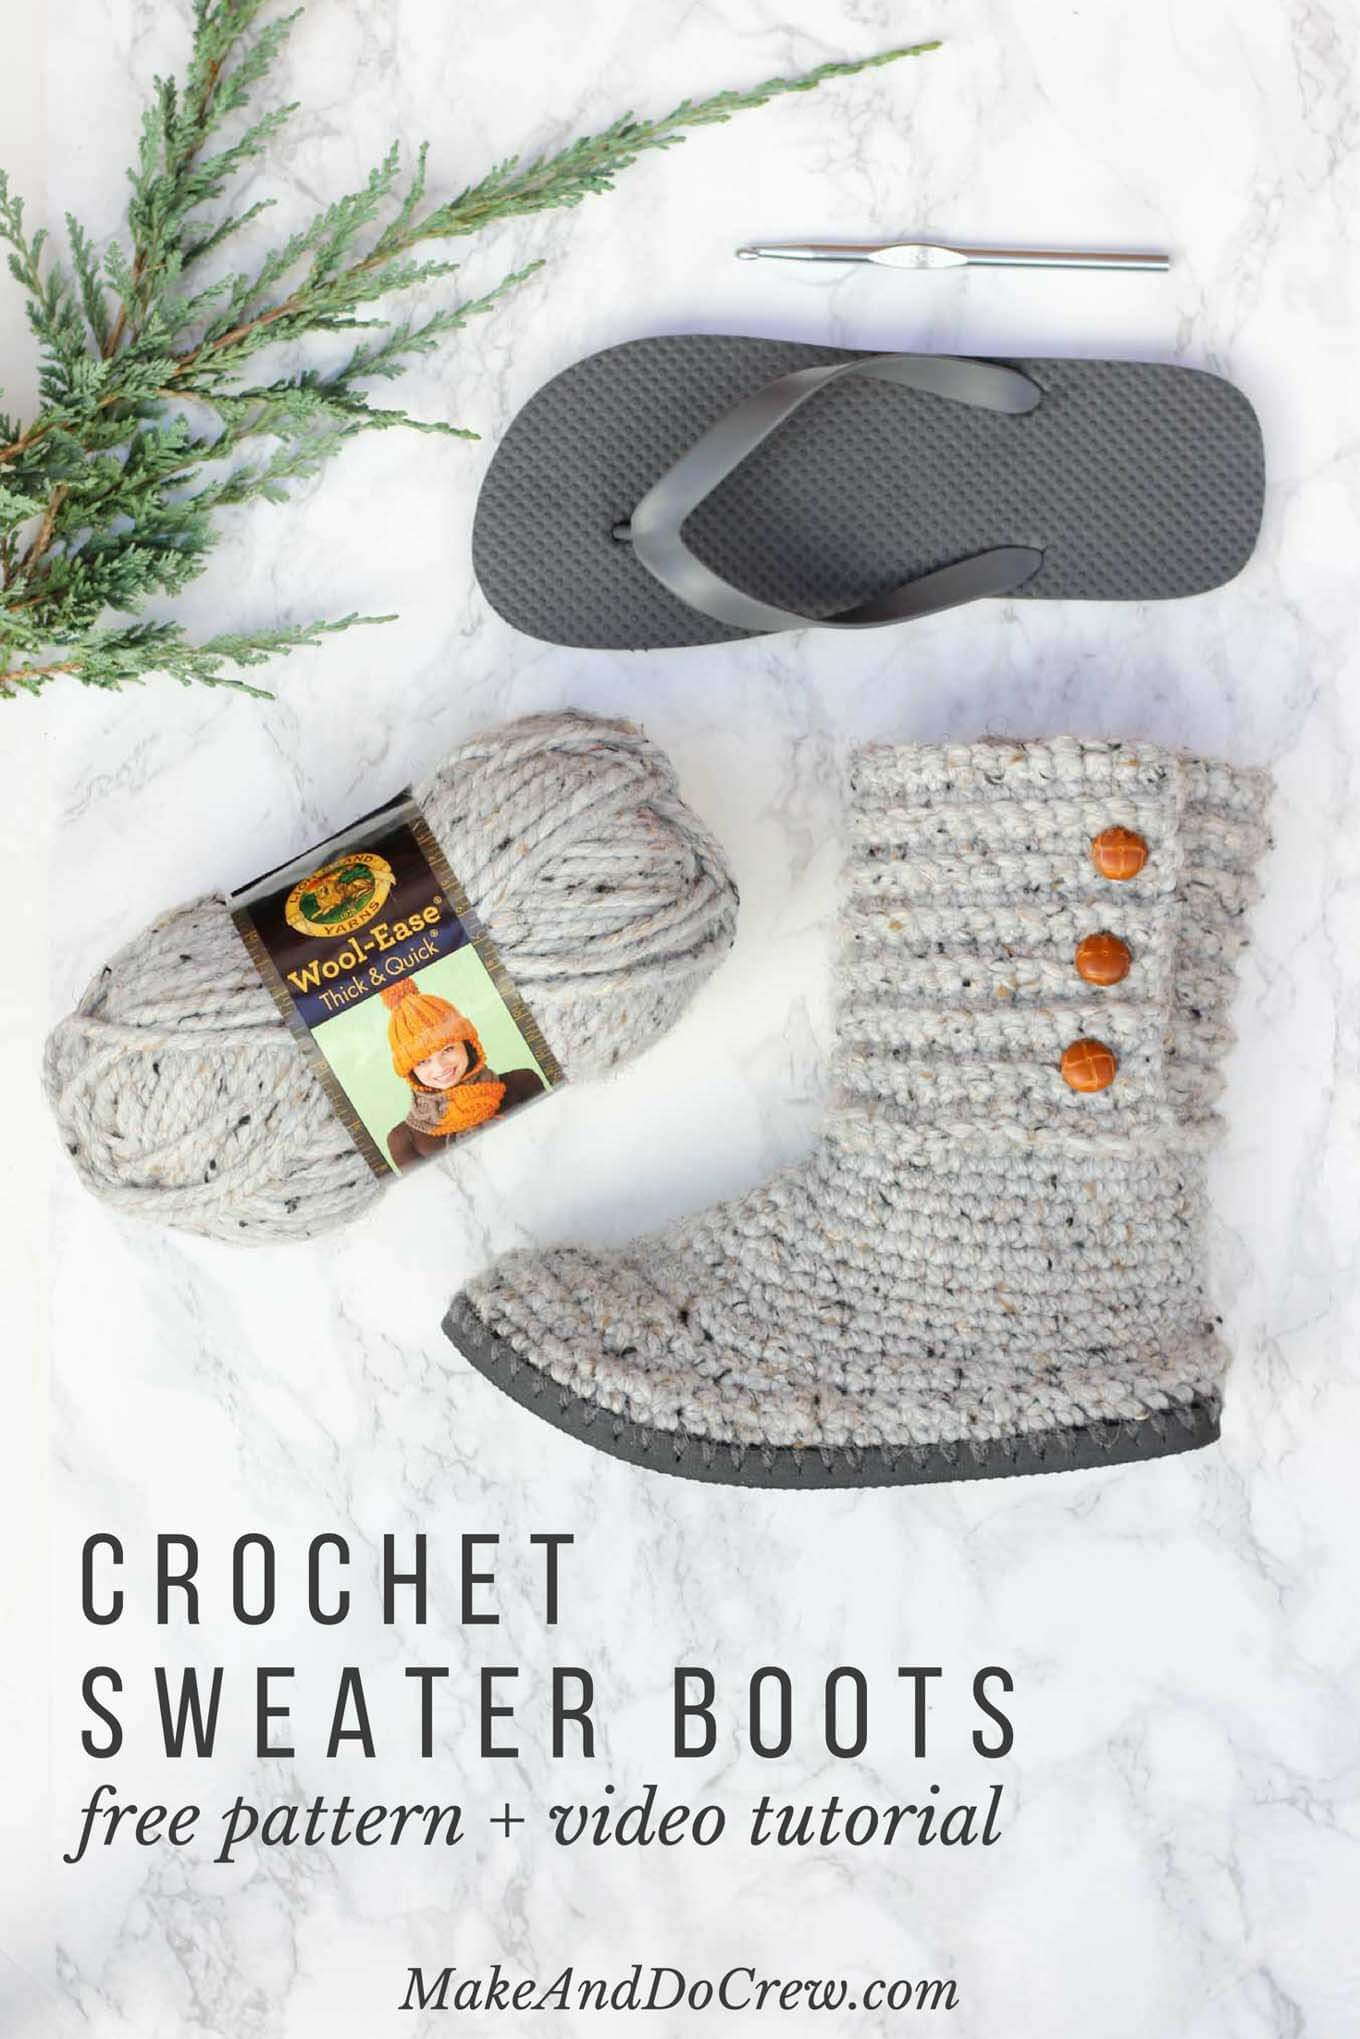 Knitting Patterns For Slipper Boots How To Crochet Boots With Flip Flops Free Pattern Video Tutorial